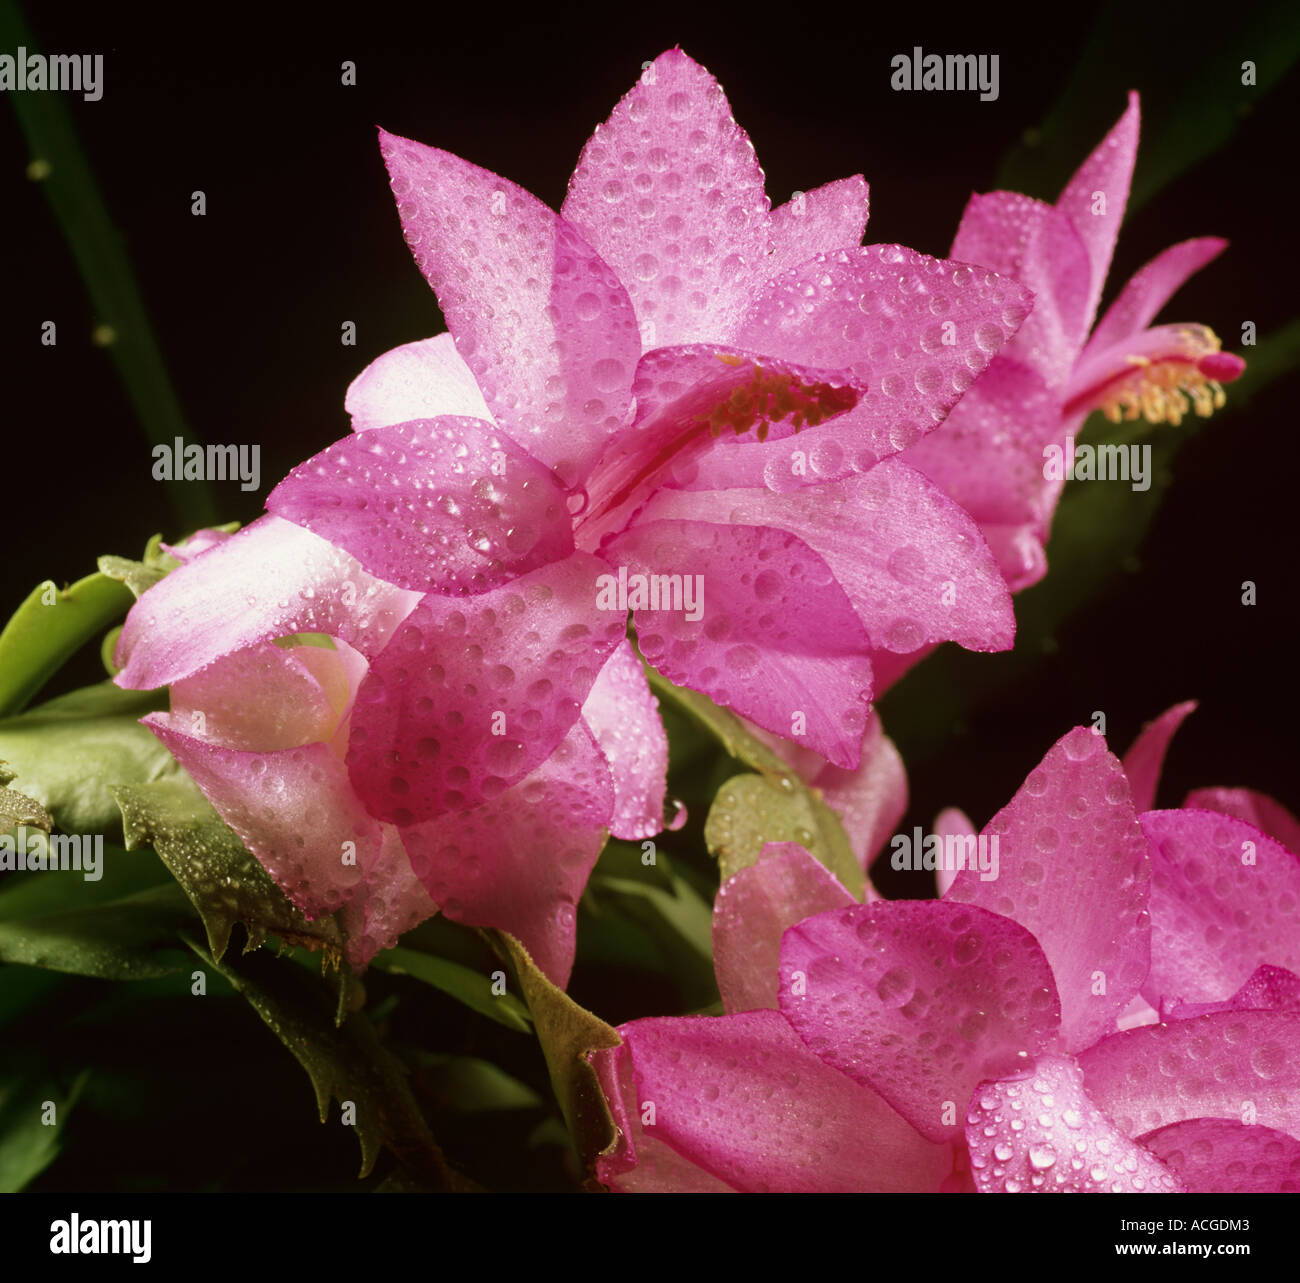 Flowering Christmas cactus Schlumbergera truncata with water drops and backlit Stock Photo